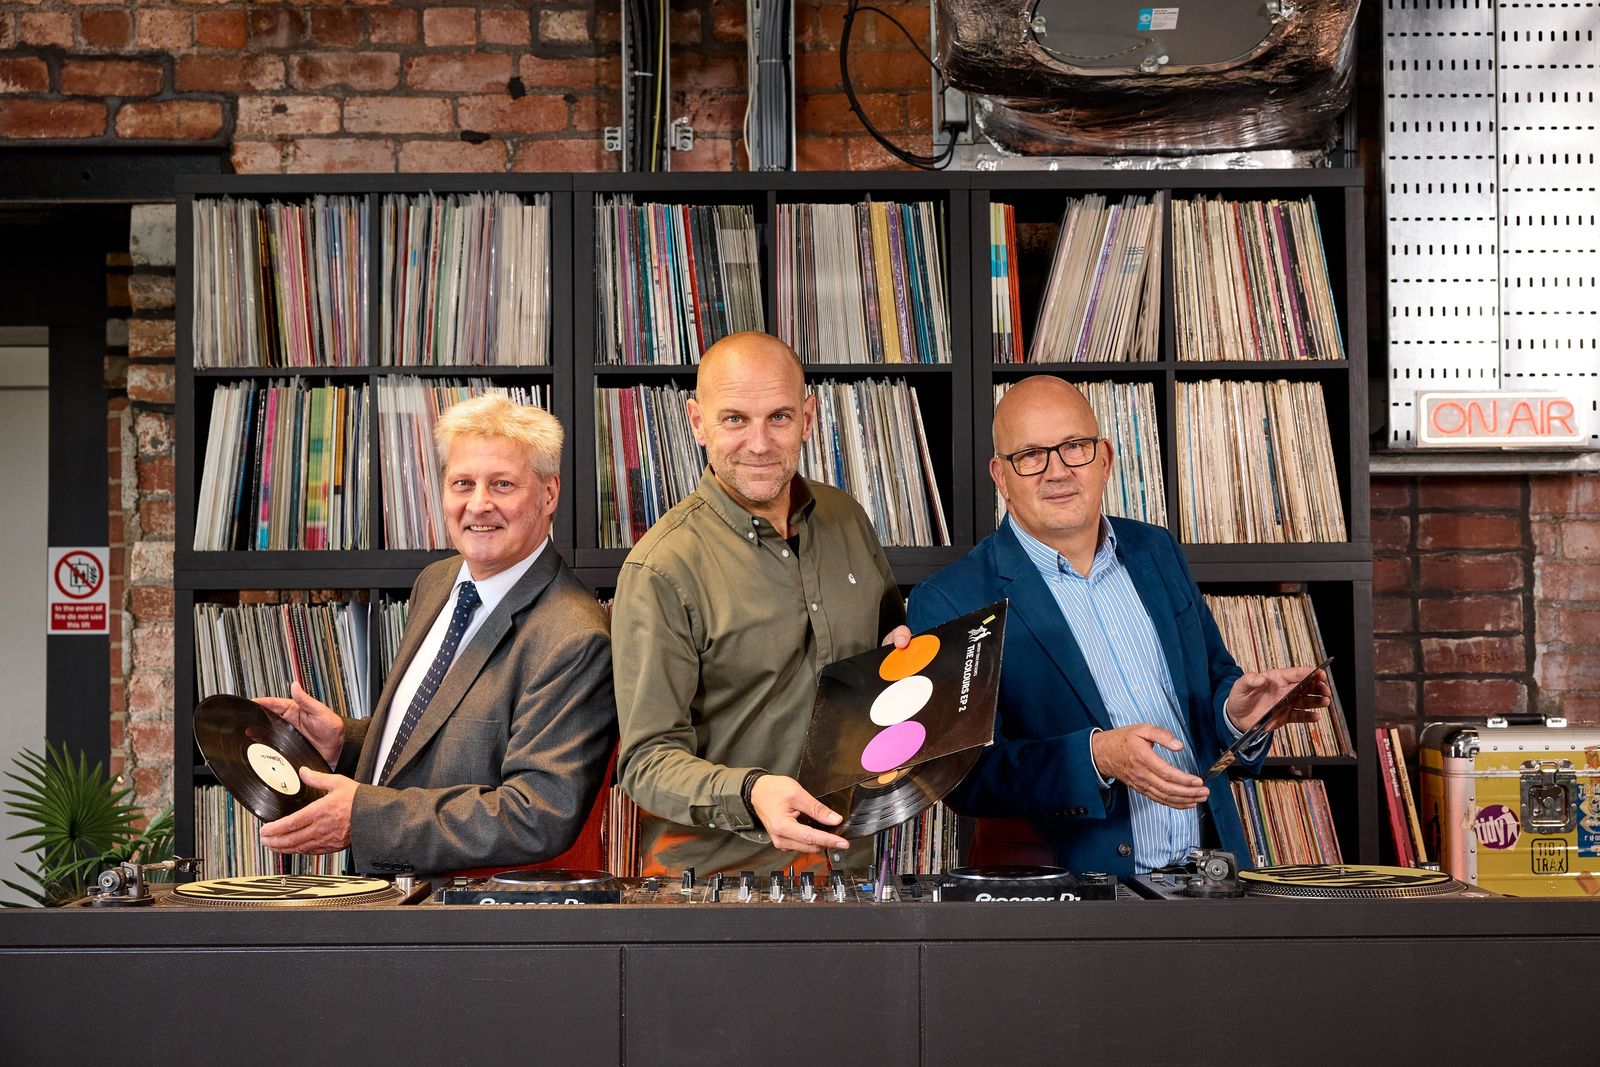 Music Factory charts further success with £1 million investment